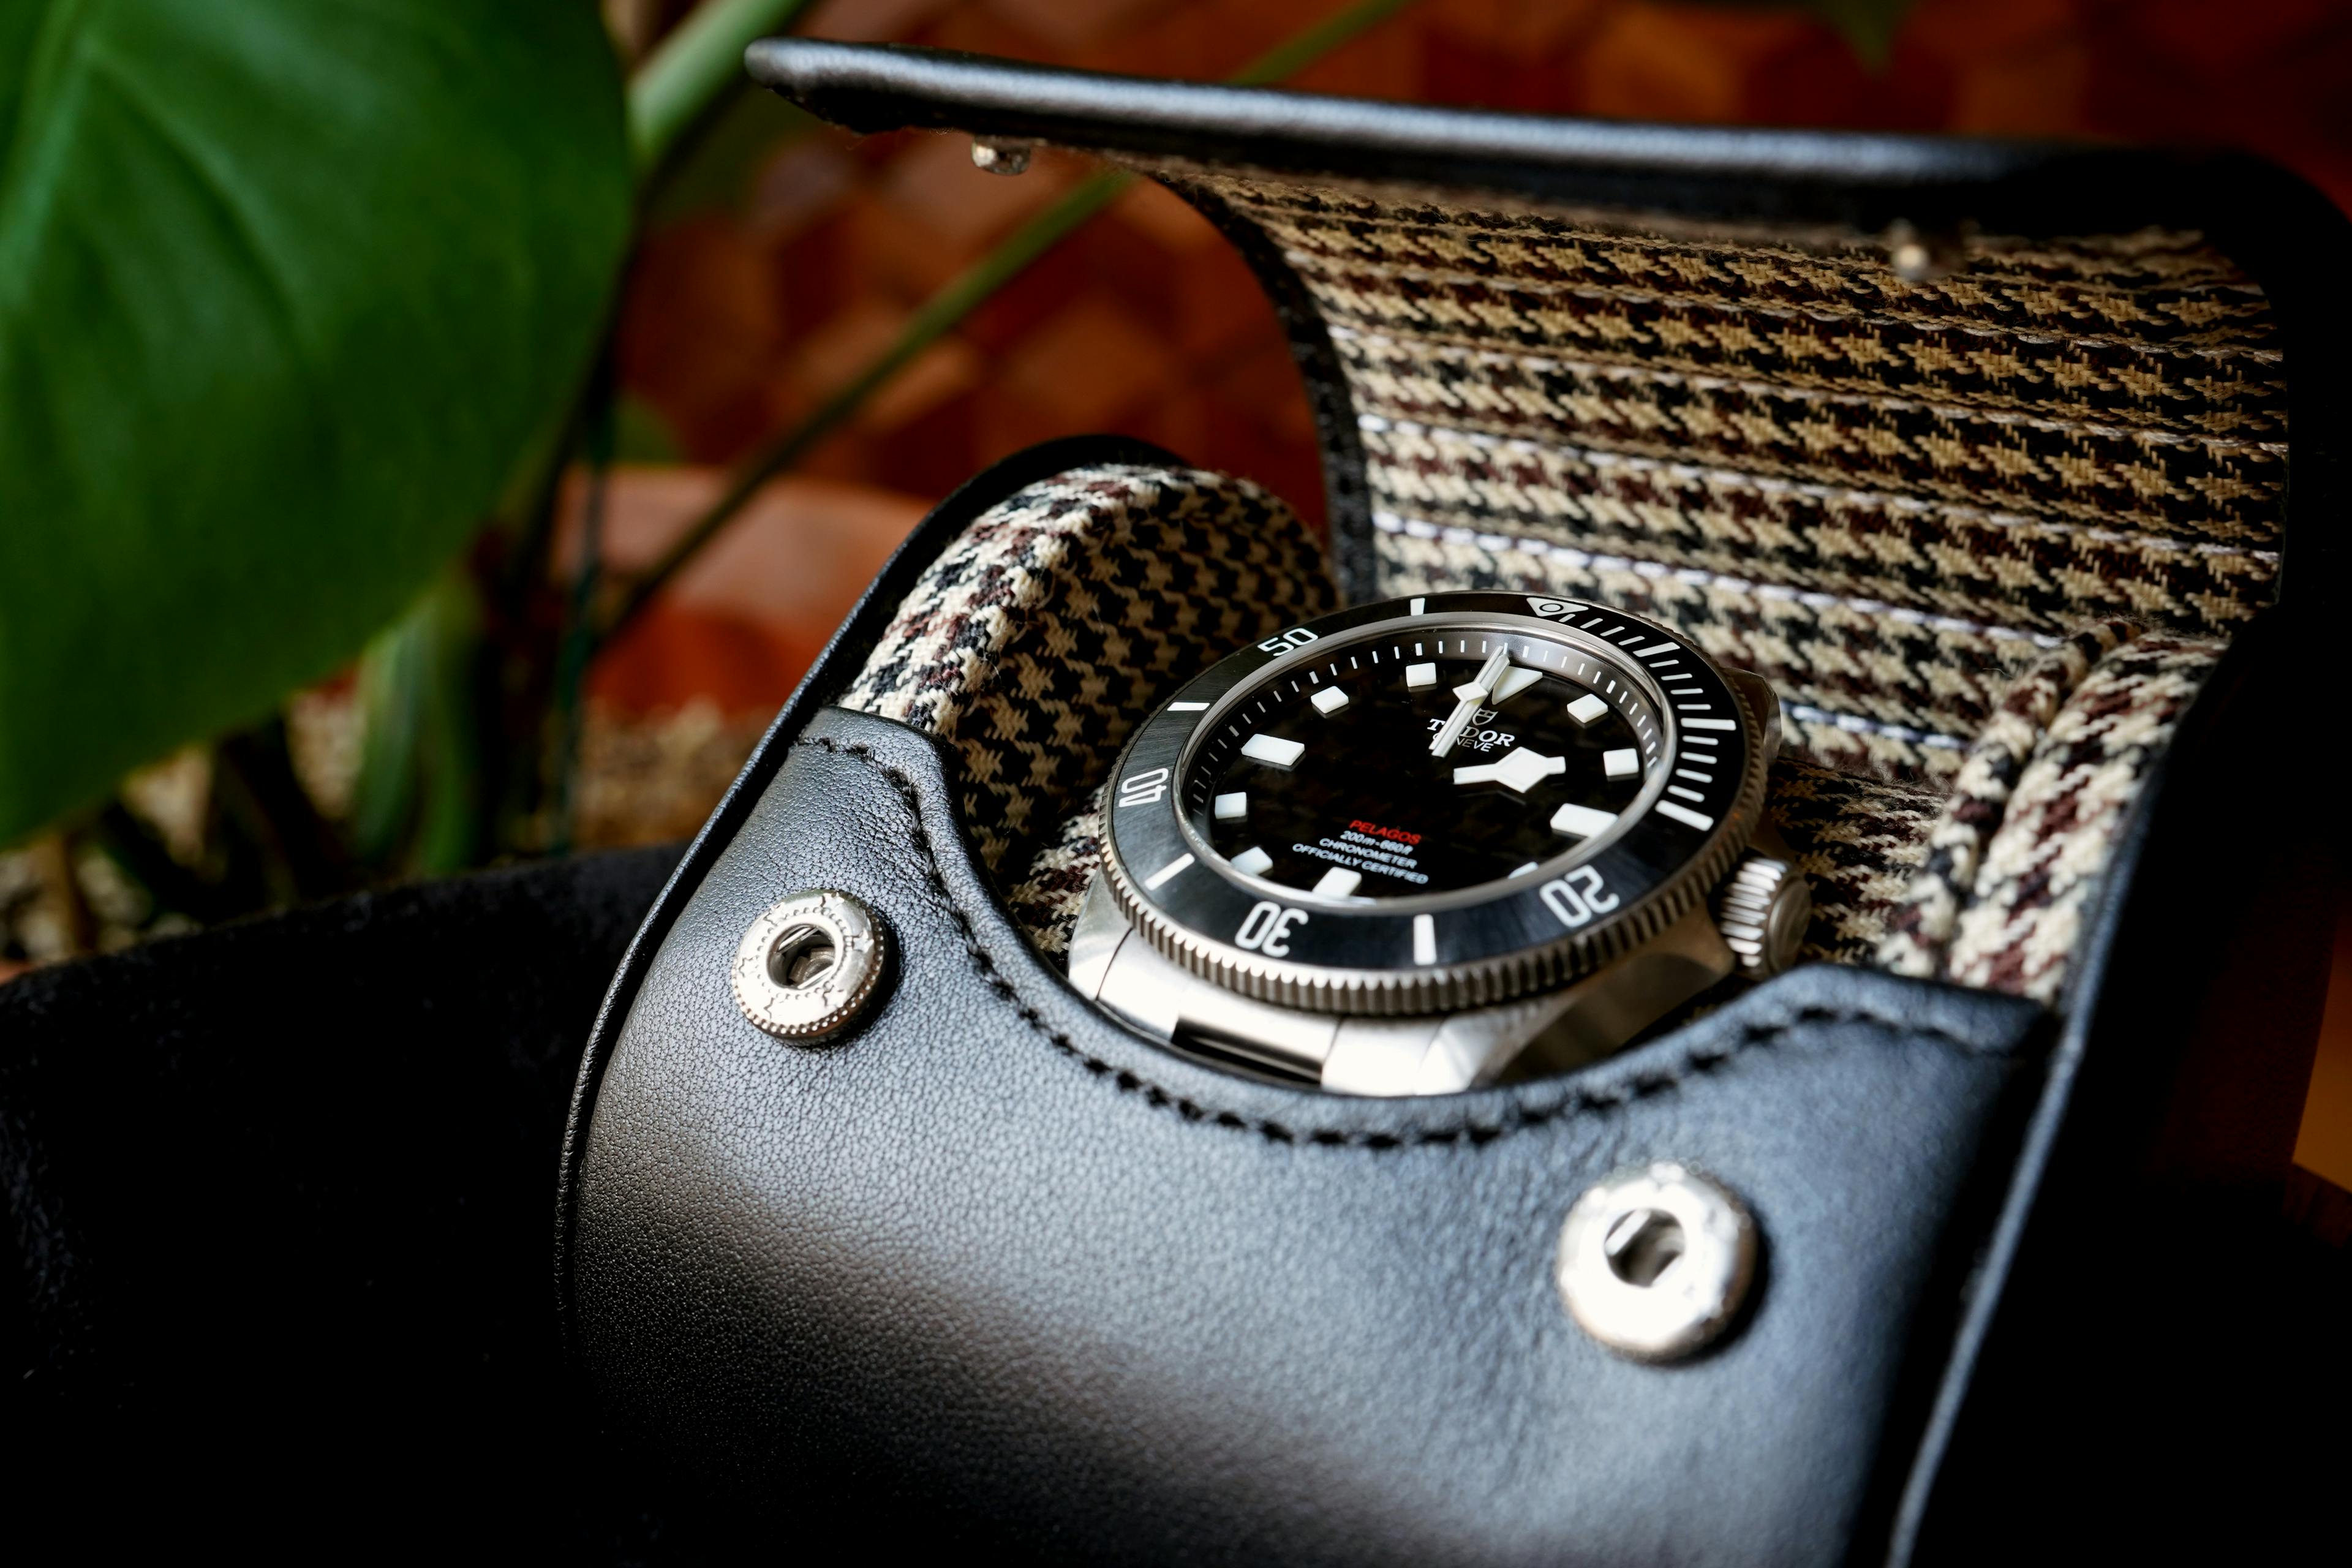 Elevate your watch collection to new heights of elegance with our Noir Luxury Watch Case. This exquisite case boasts a sleek Black Leather exterior paired with a sophisticated Brown and Black Tartan Interior, marrying style and protection seamlessly. Crafted with precision and passion, it's the ultimate guardian for your cherished timepieces.

In this timeless masterpiece, modern aesthetics blend effortlessly with classic design. The contrast between the rich black leather and the warm, inviting tartan interior creates an unforgettable visual. As you envision your watches nestled within, you'll appreciate the care we've taken to ensure both fashion and function are held in perfect balance.

Explore the world of luxury watch storage, where every detail is considered, and each watch finds its own cocoon of beauty and security. Whether for personal use or as an exceptional gift, our Noir case embodies the essence of sophistication and safeguarding. Discover the perfect companion for your watches today.